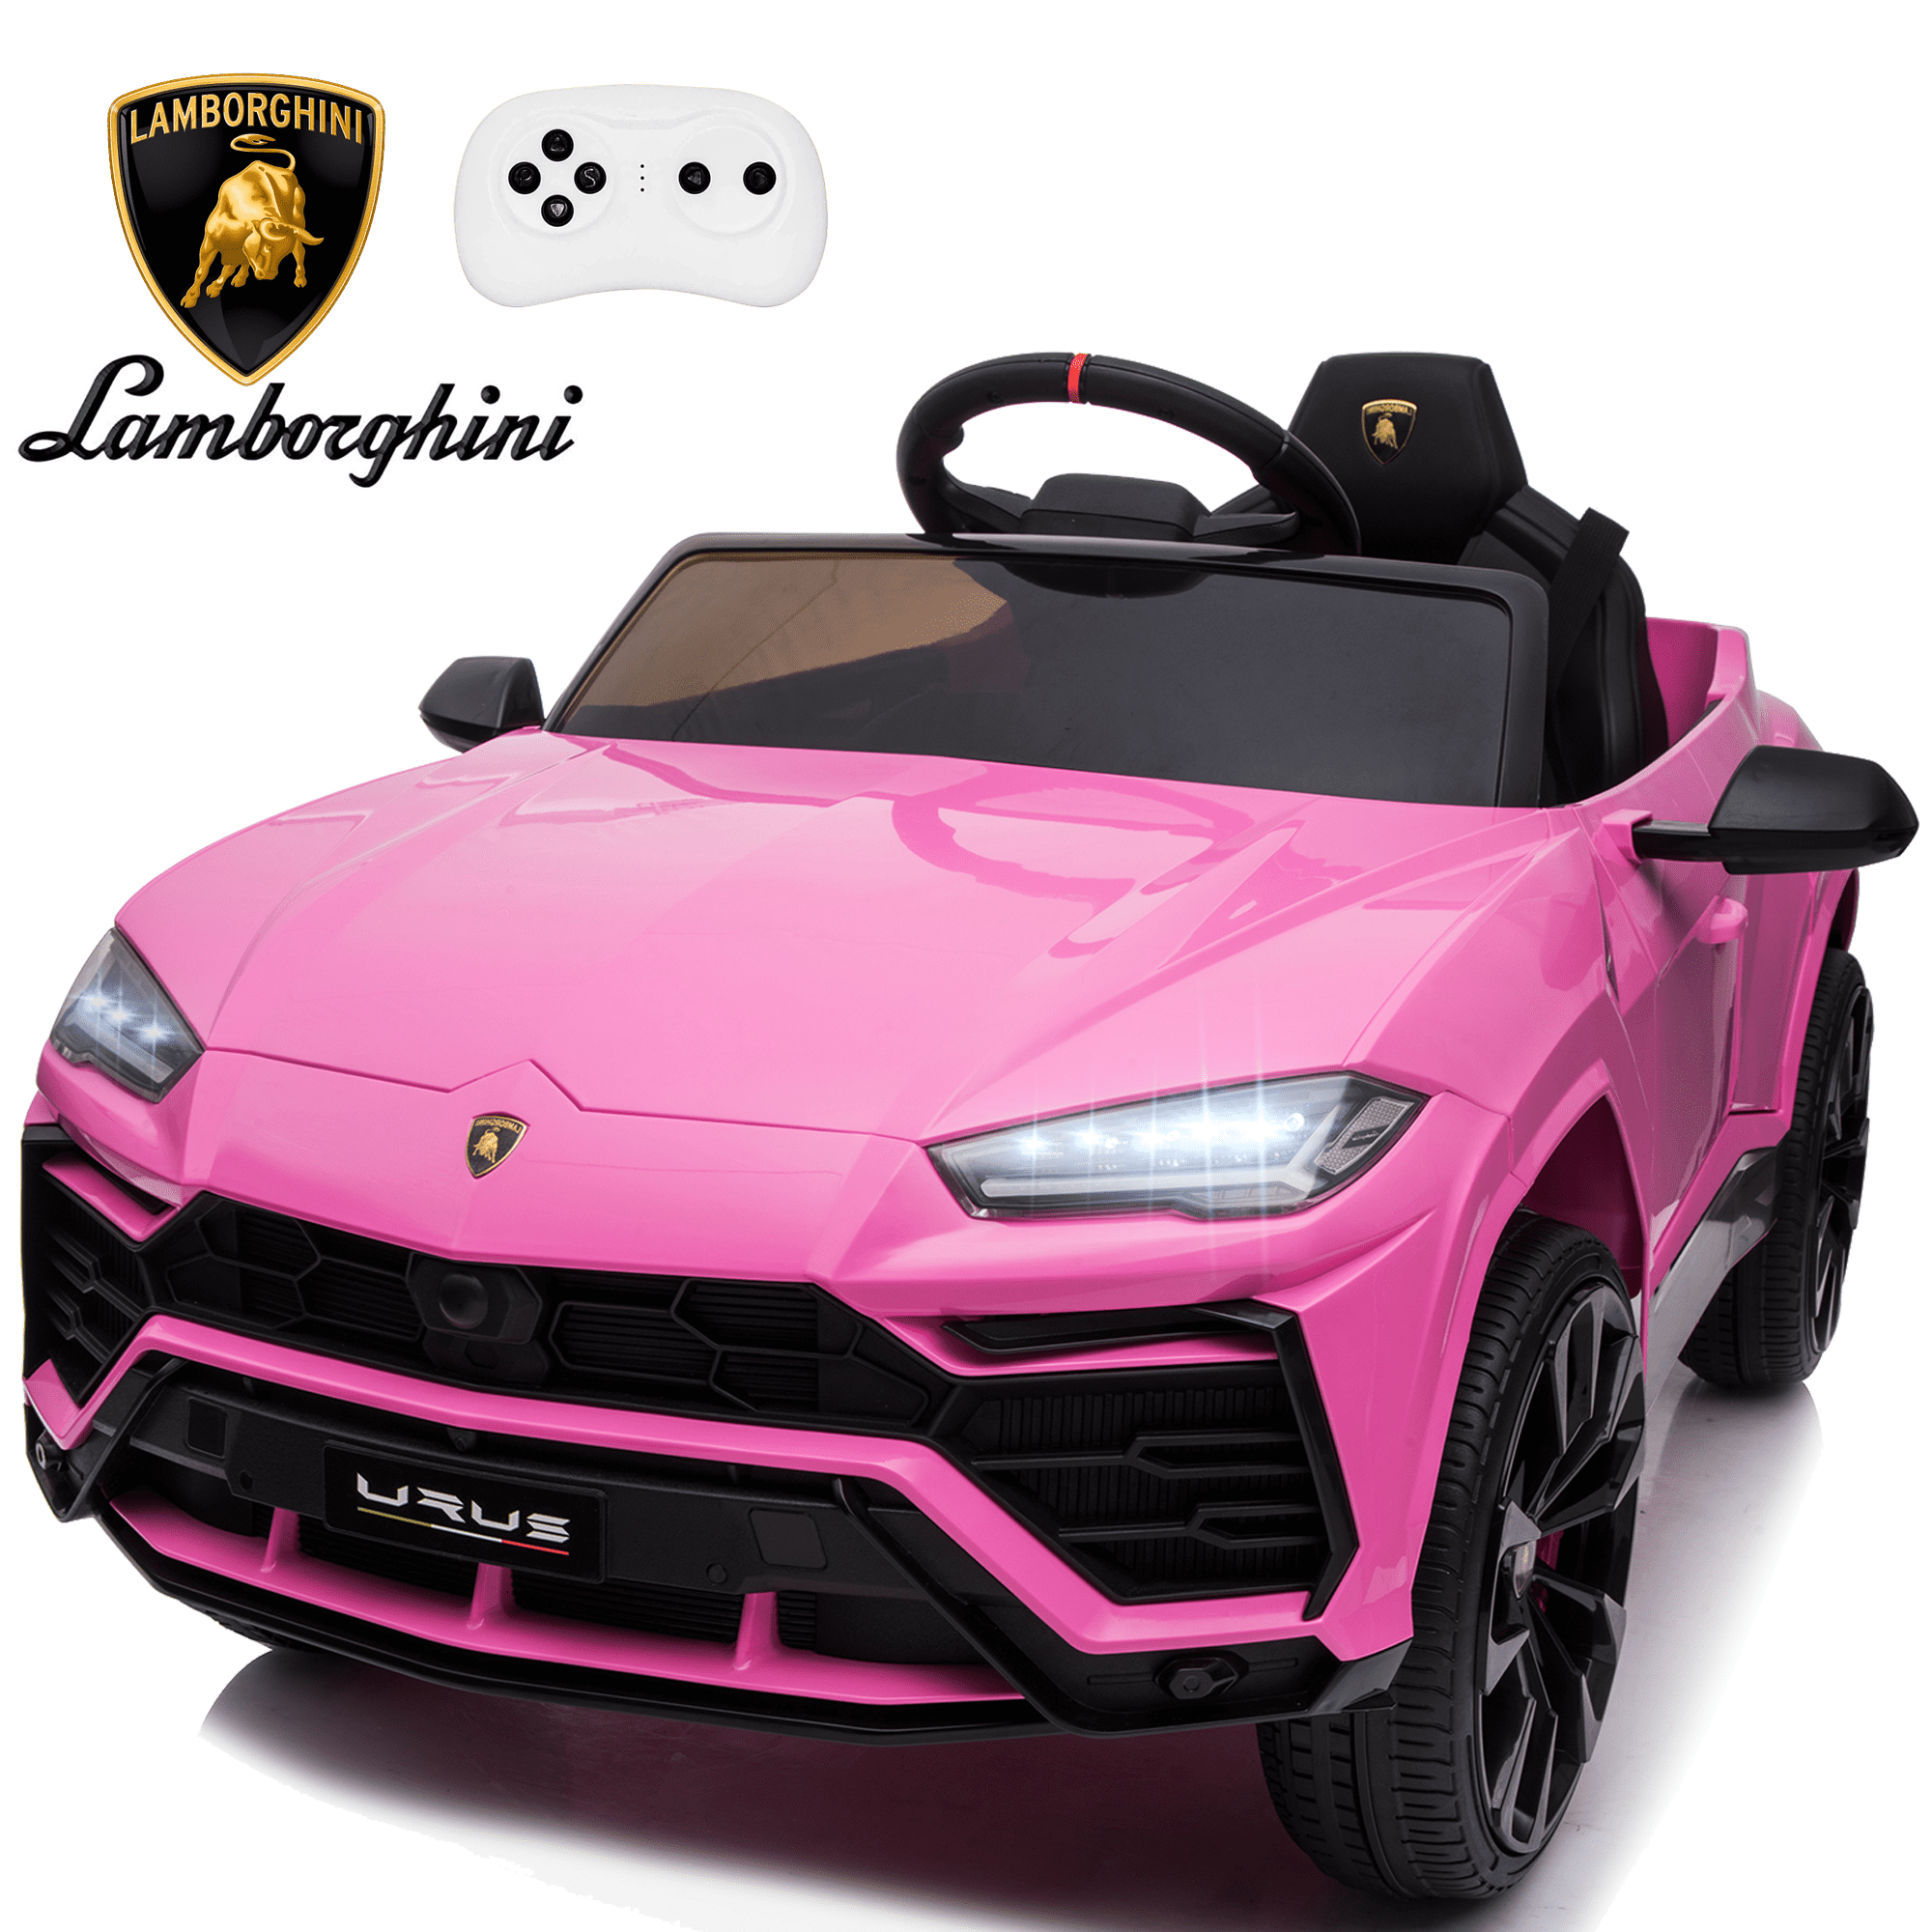 Licensed Lamborghini Ride on Car with Remote Control Kids Ride on Toy ...